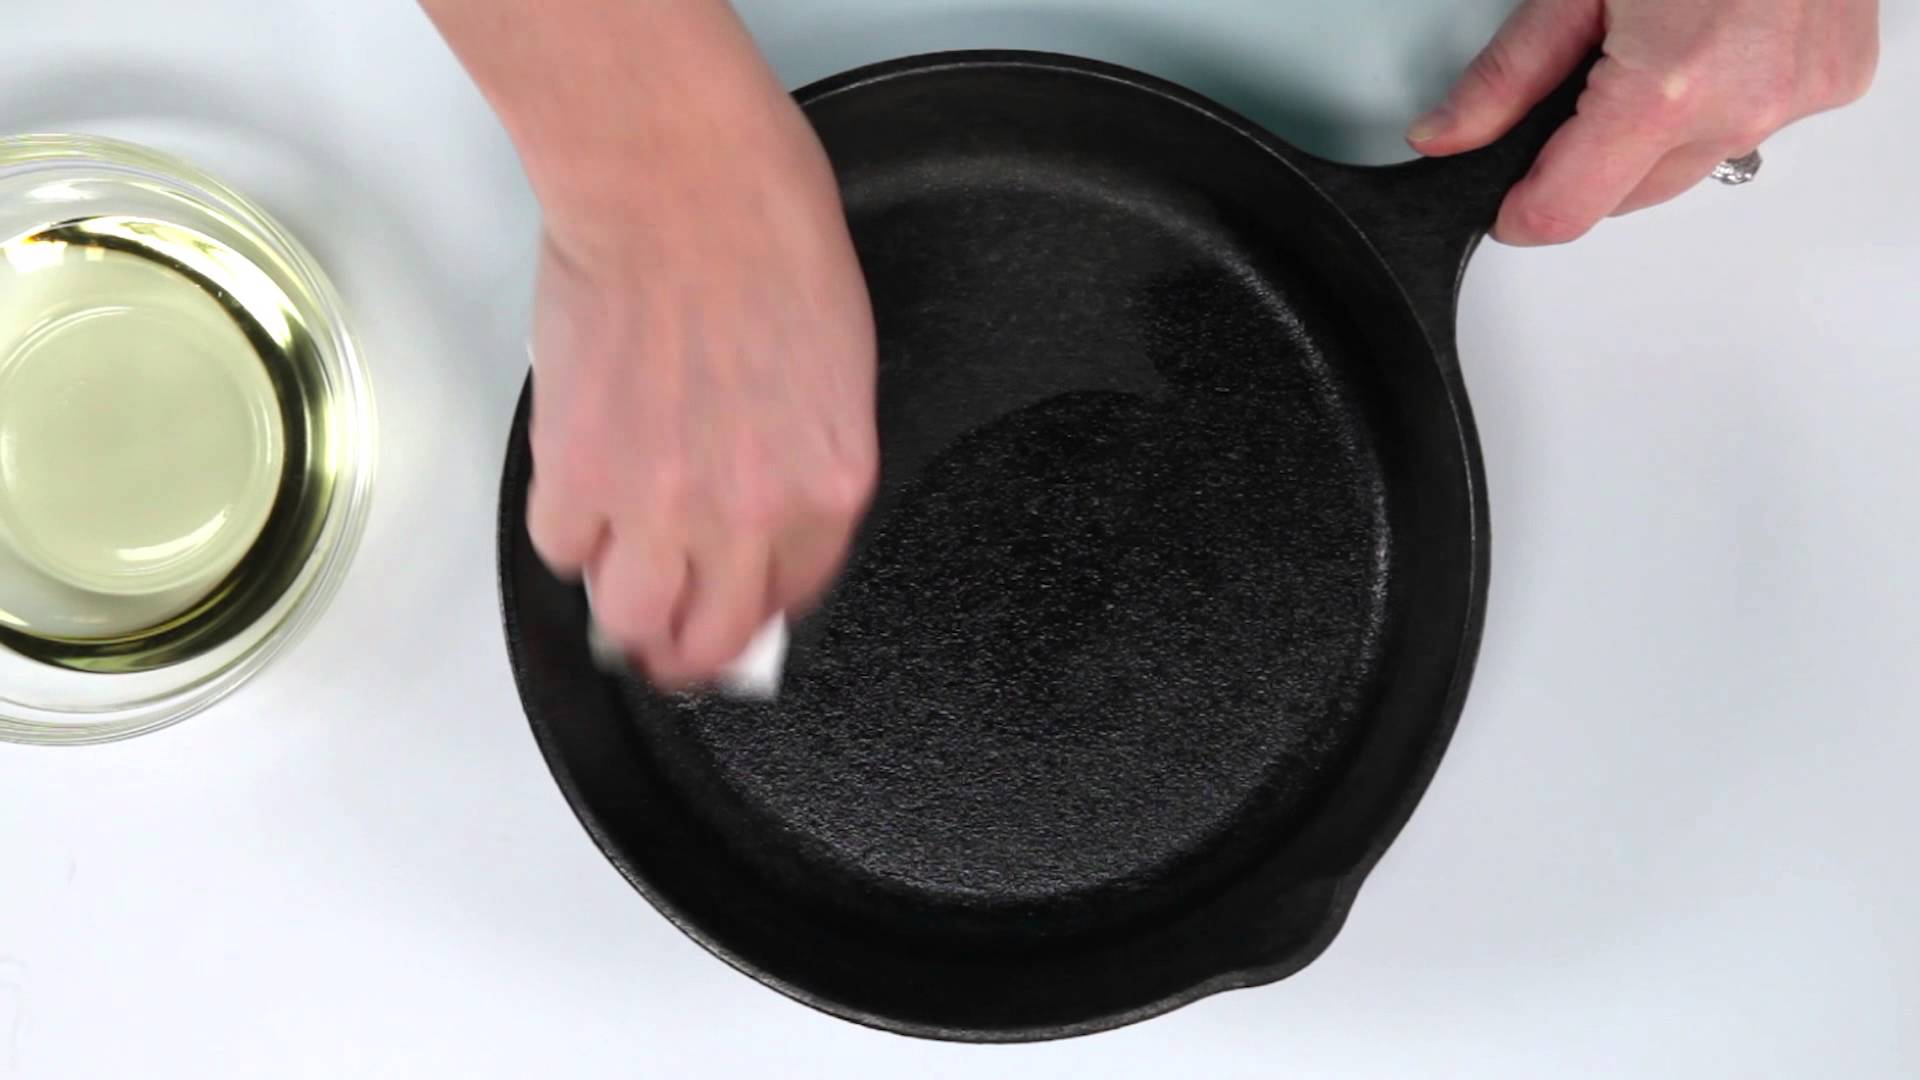 Cast iron is simple to care for and easy to clean